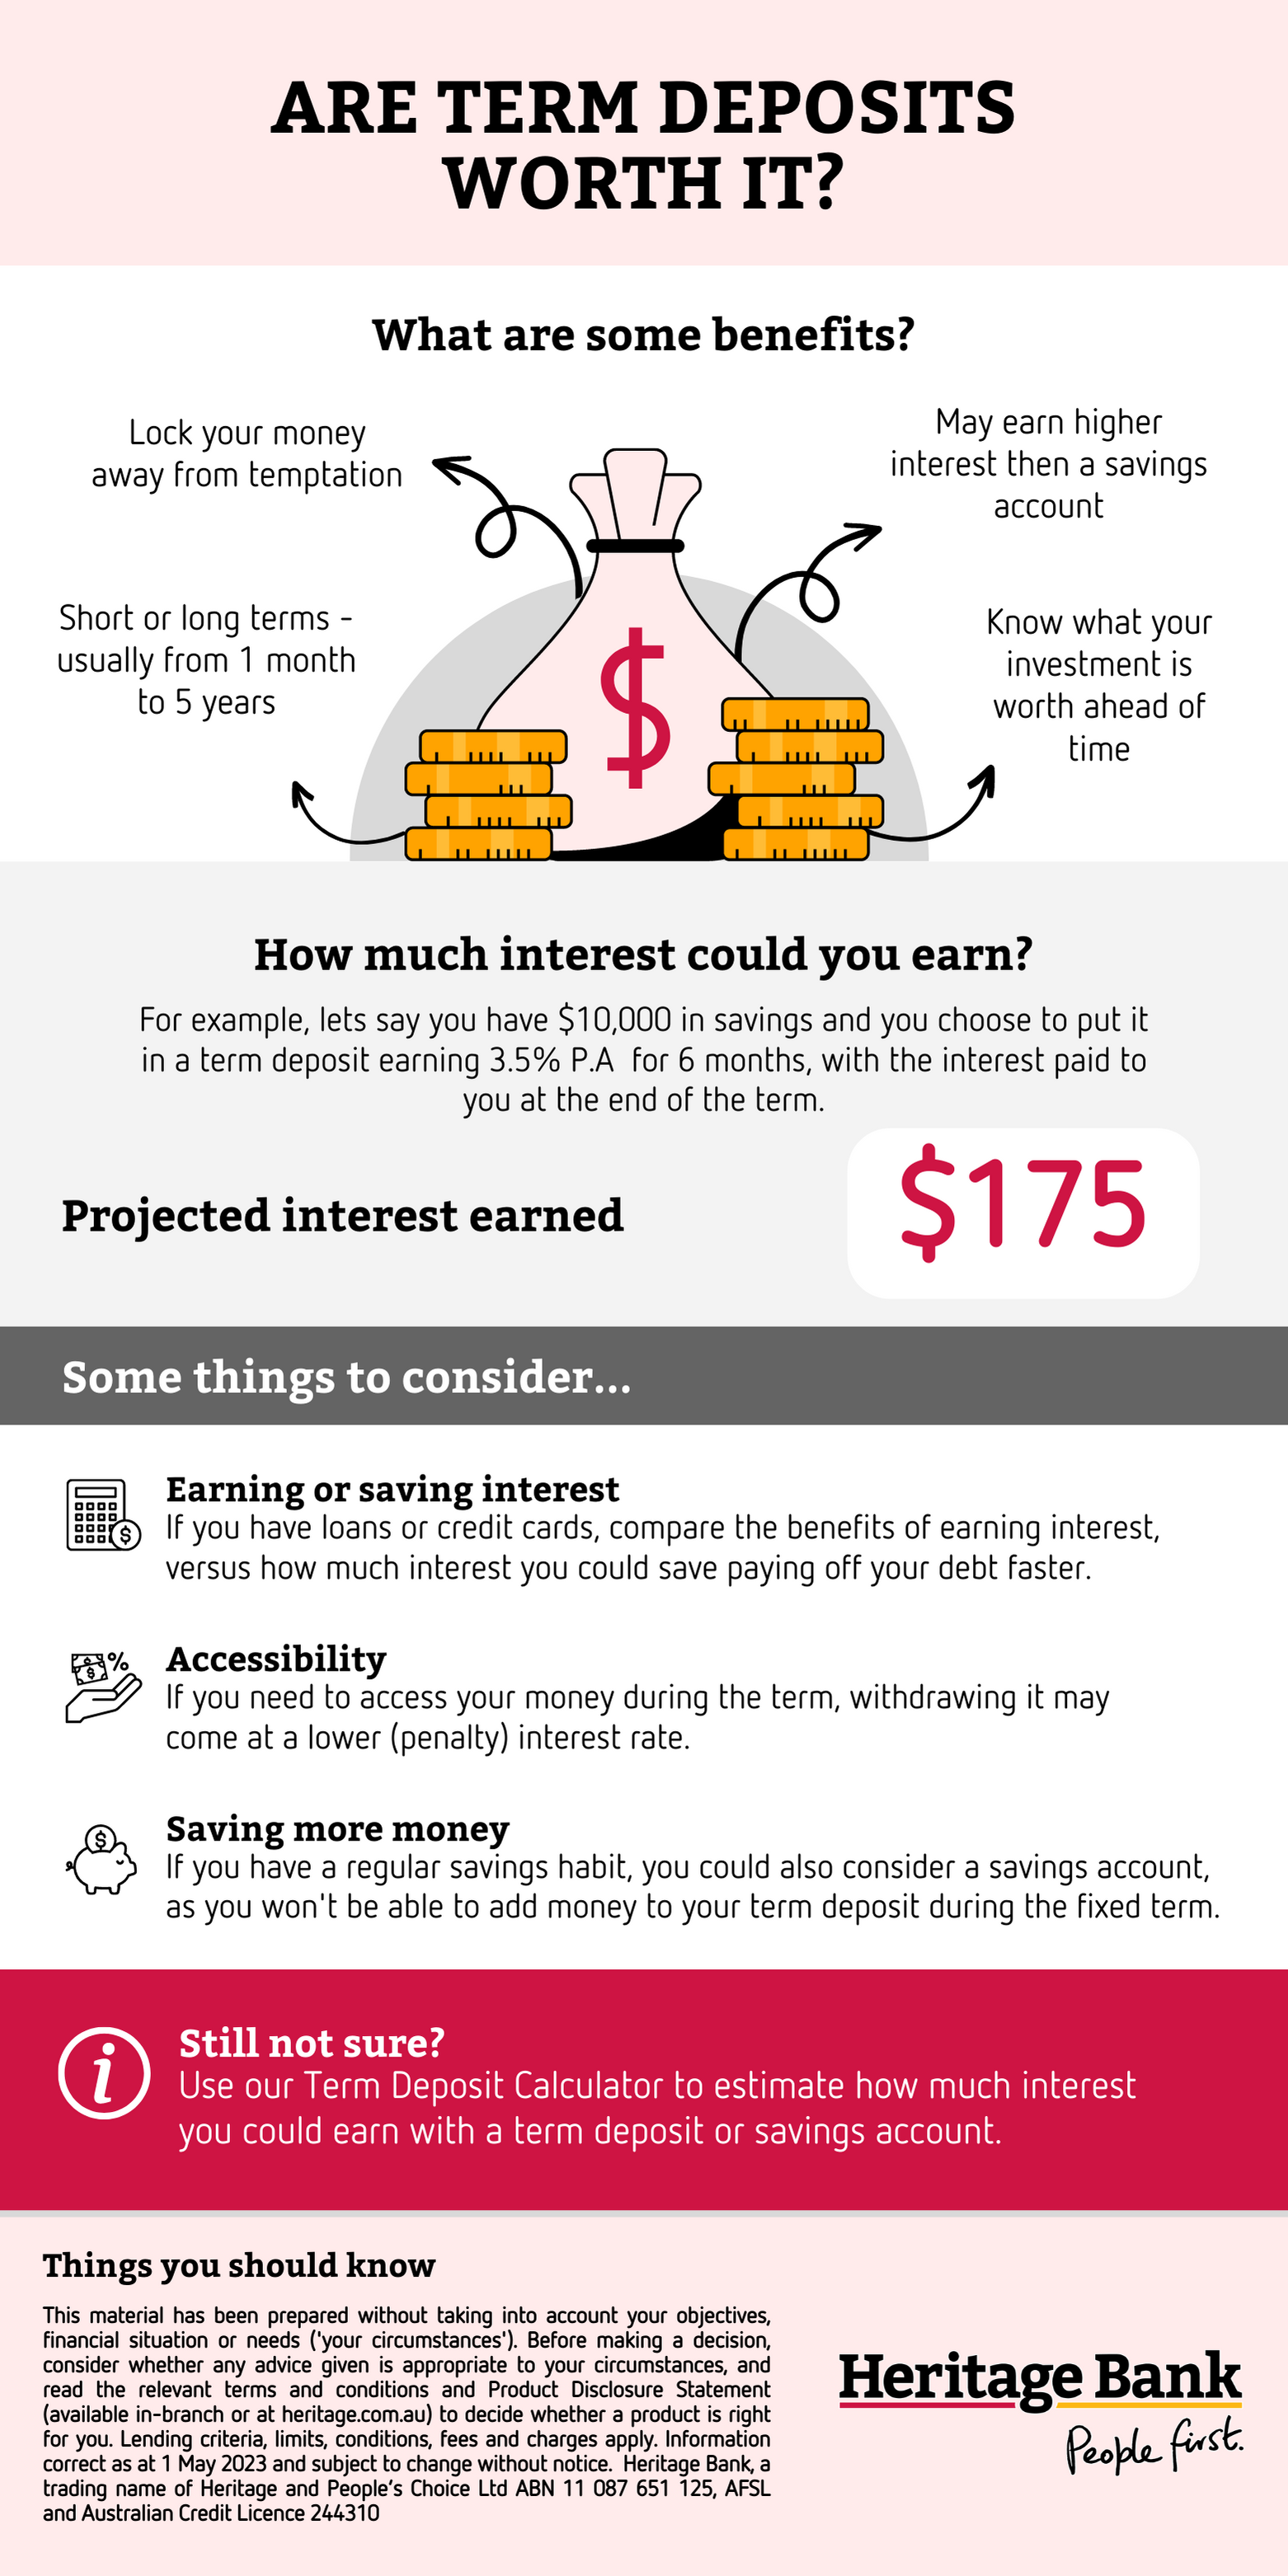 Are term deposits worth it infographic